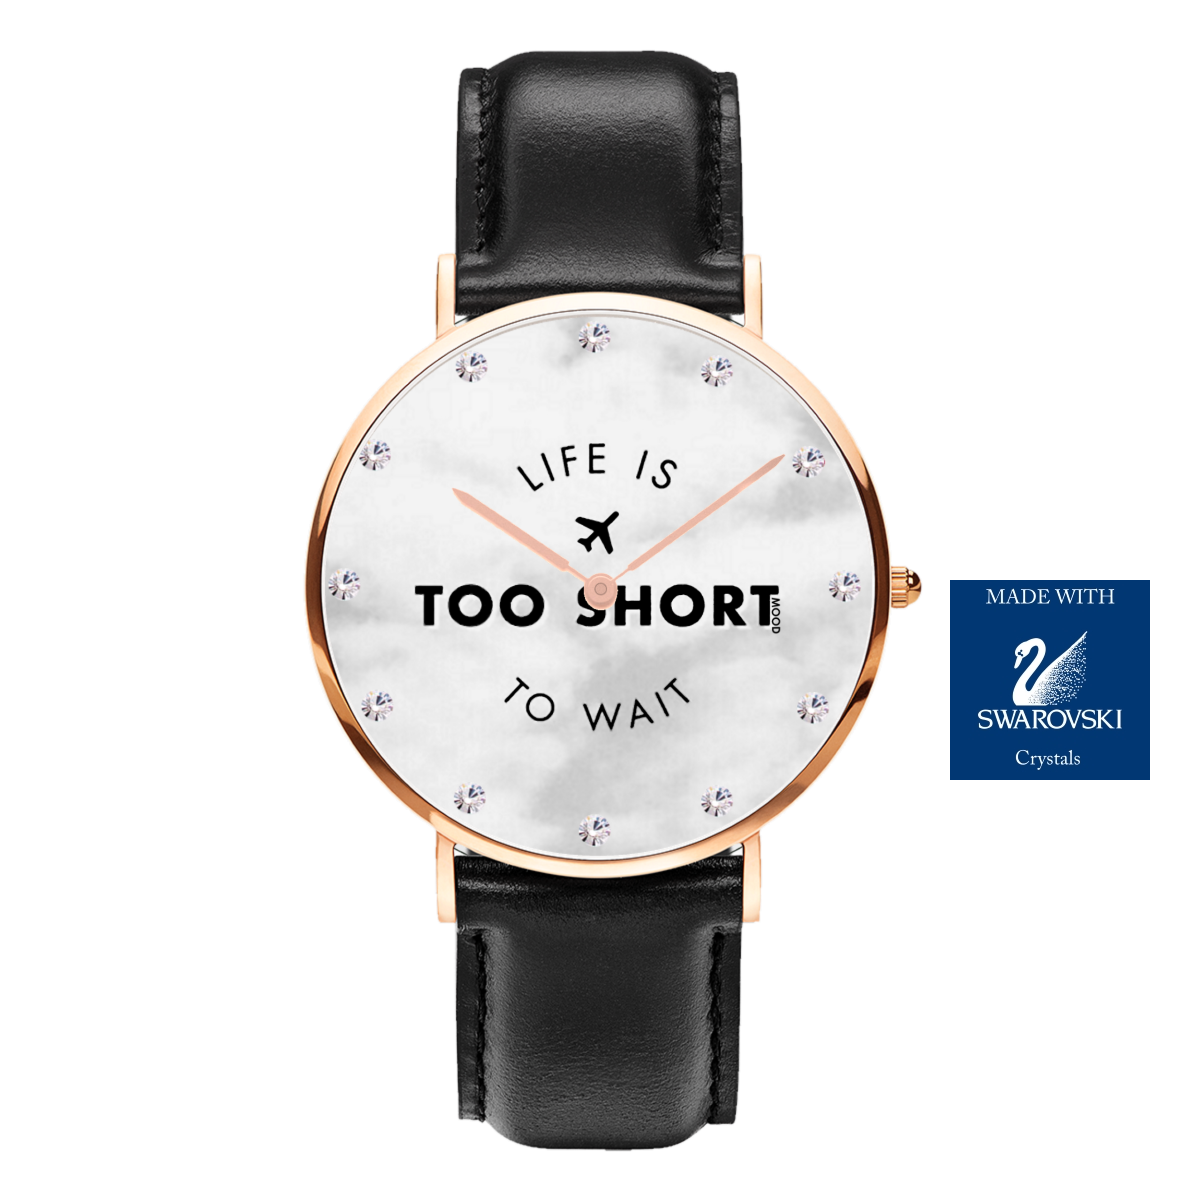 LIFE IS TOO SHORT TO WAIT